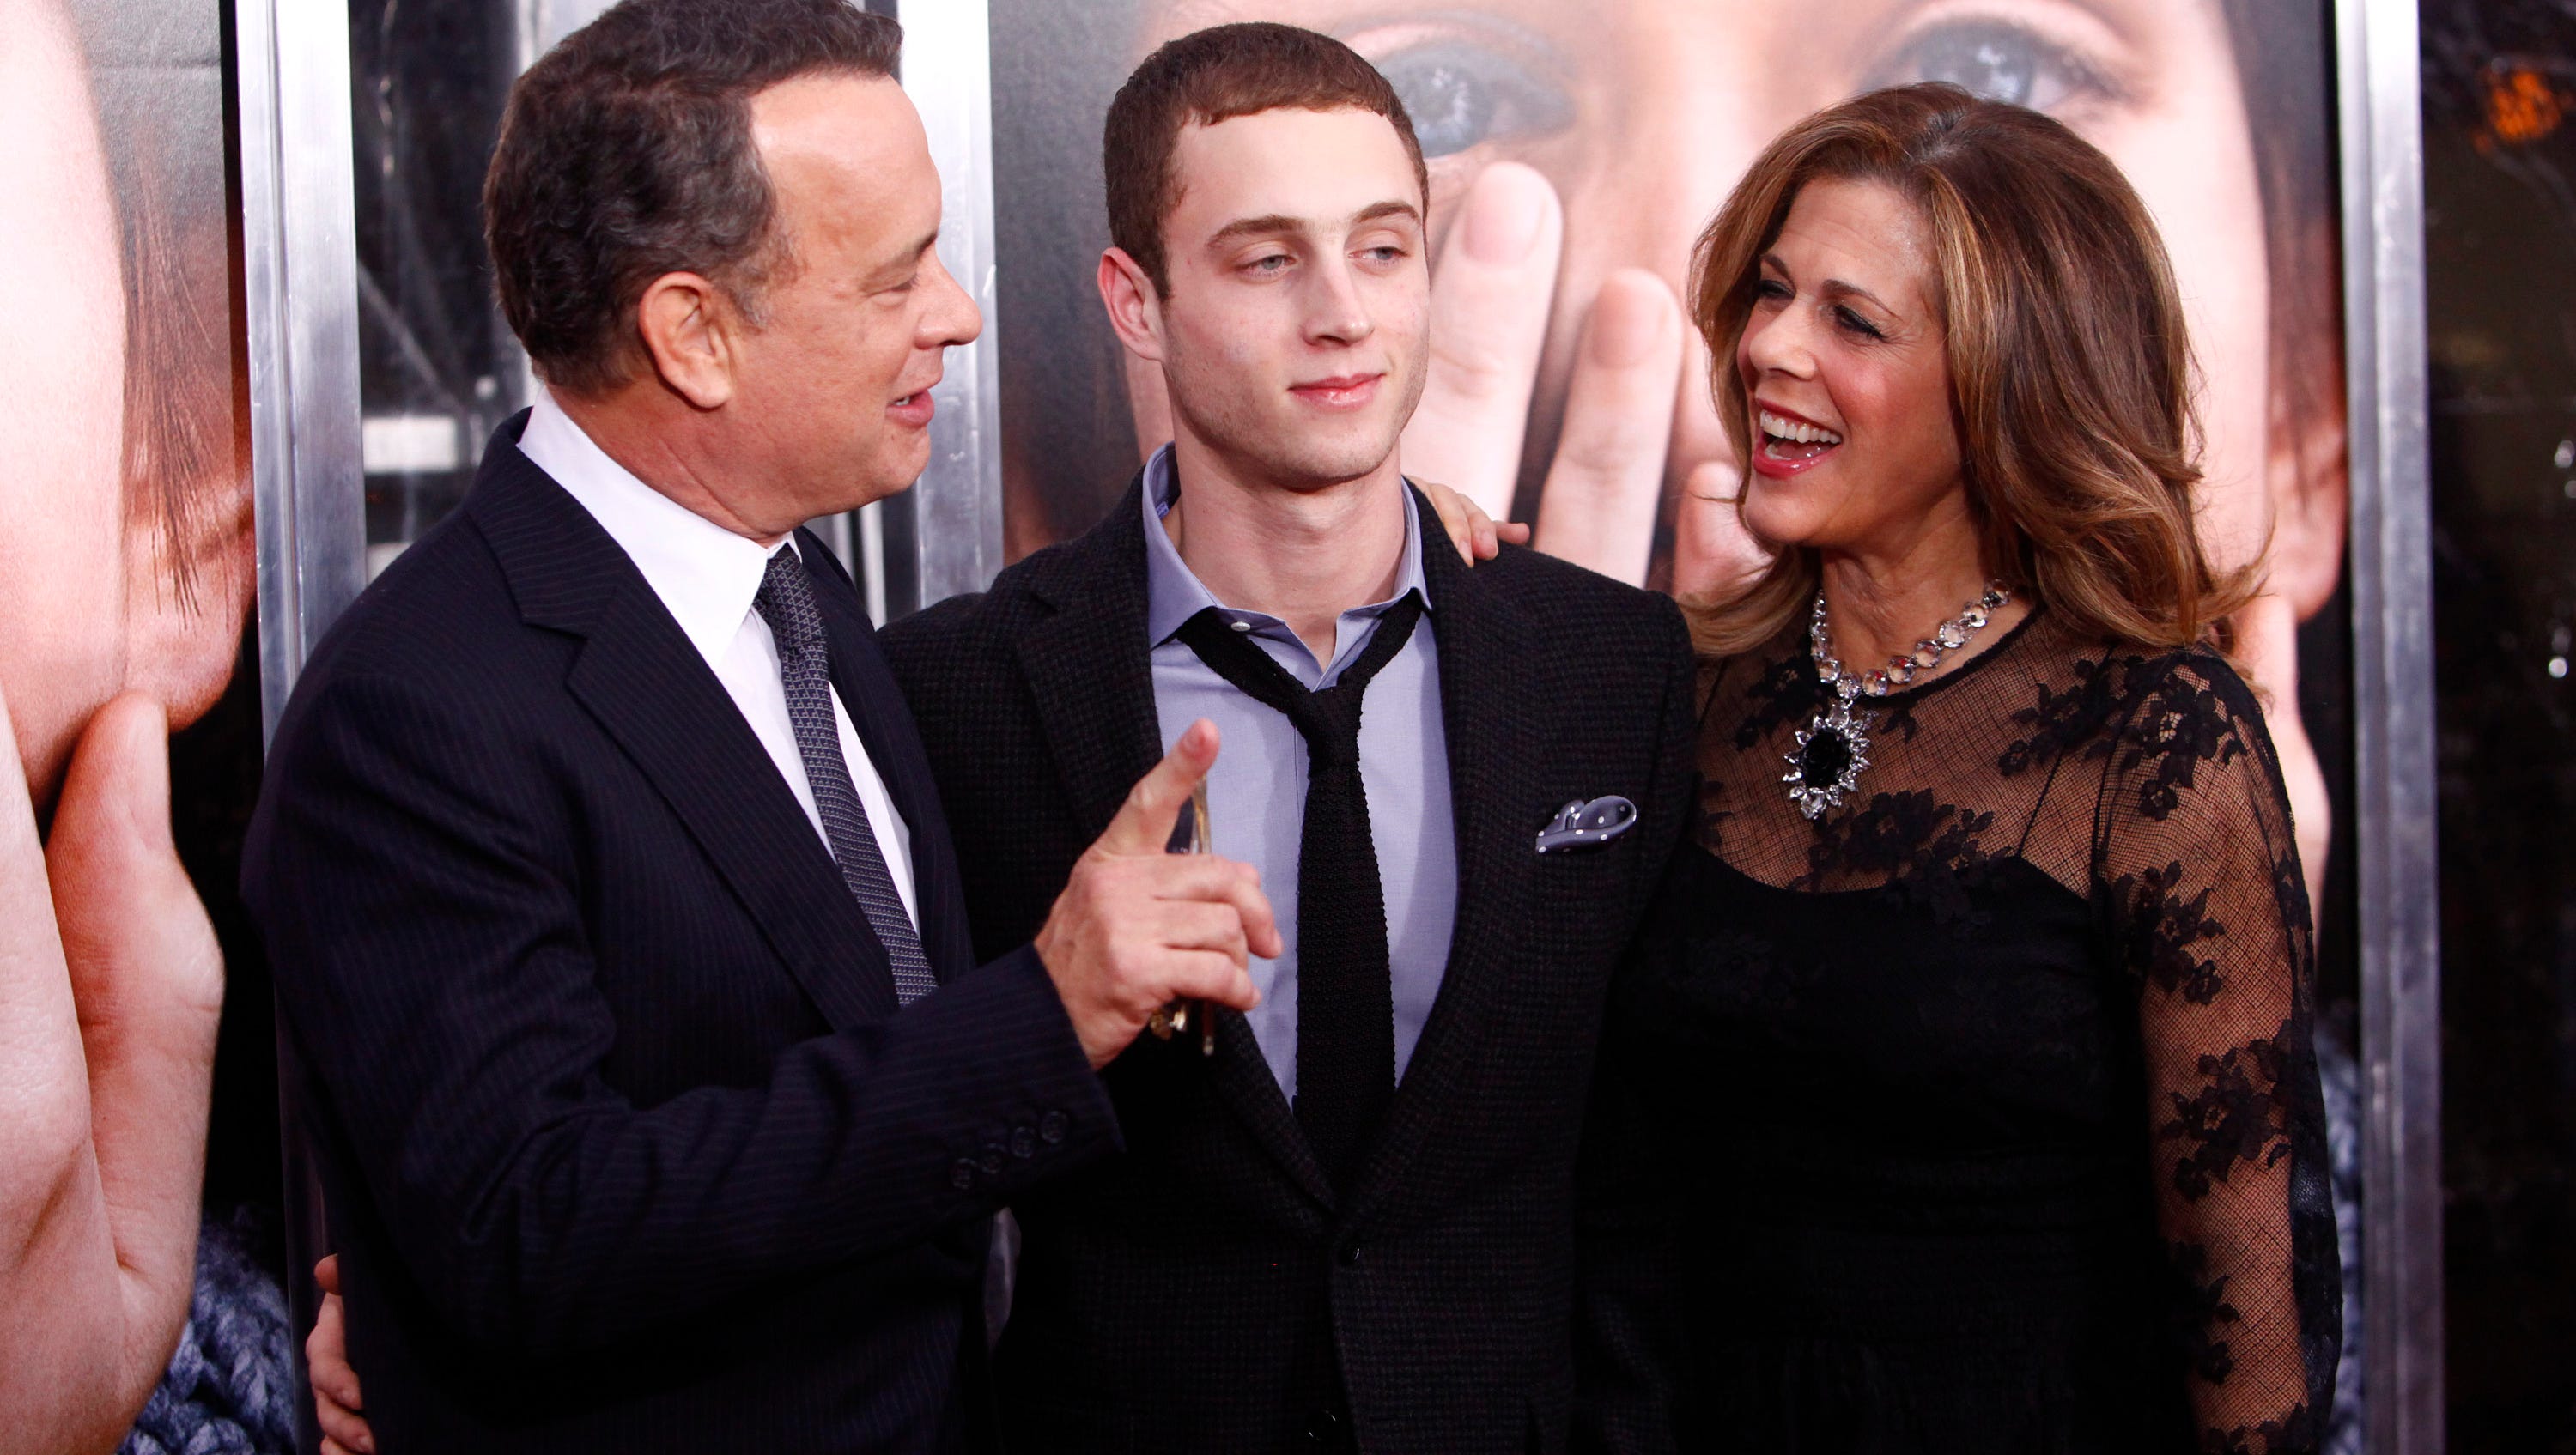 Tom Hanks' son defends using the N-word